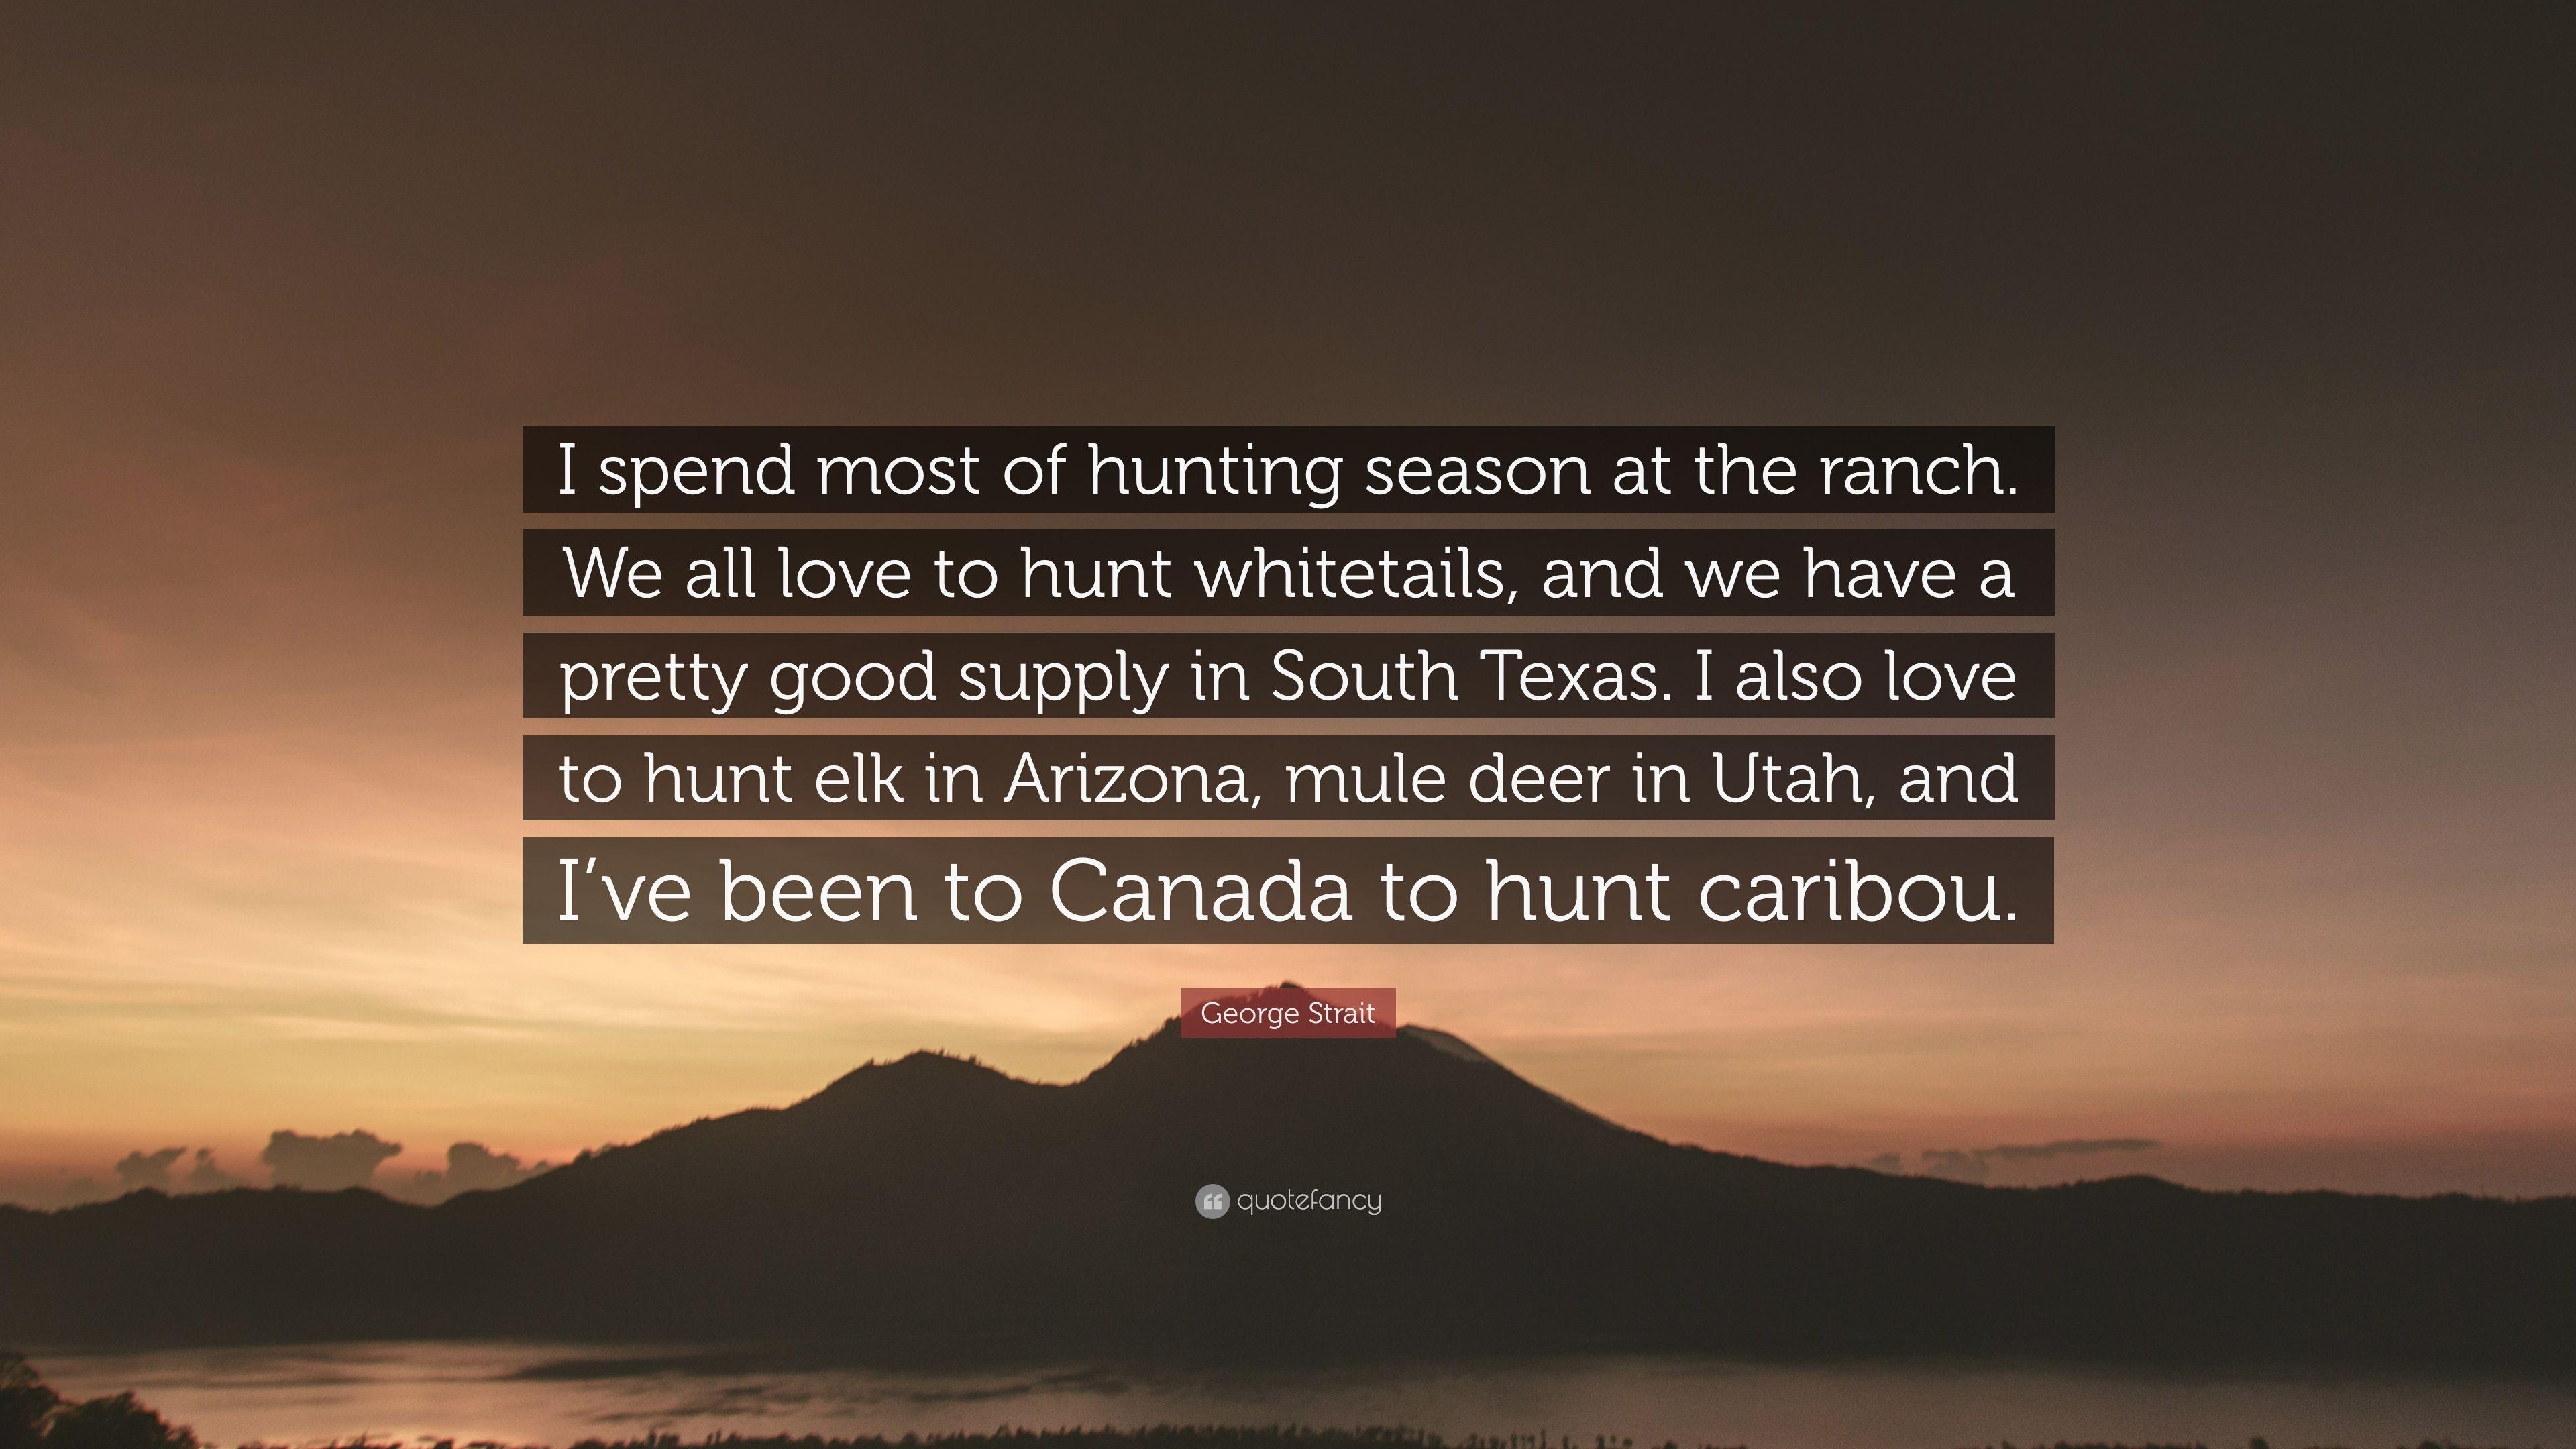 George Strait Quote: “I spend most of hunting season at the ranch